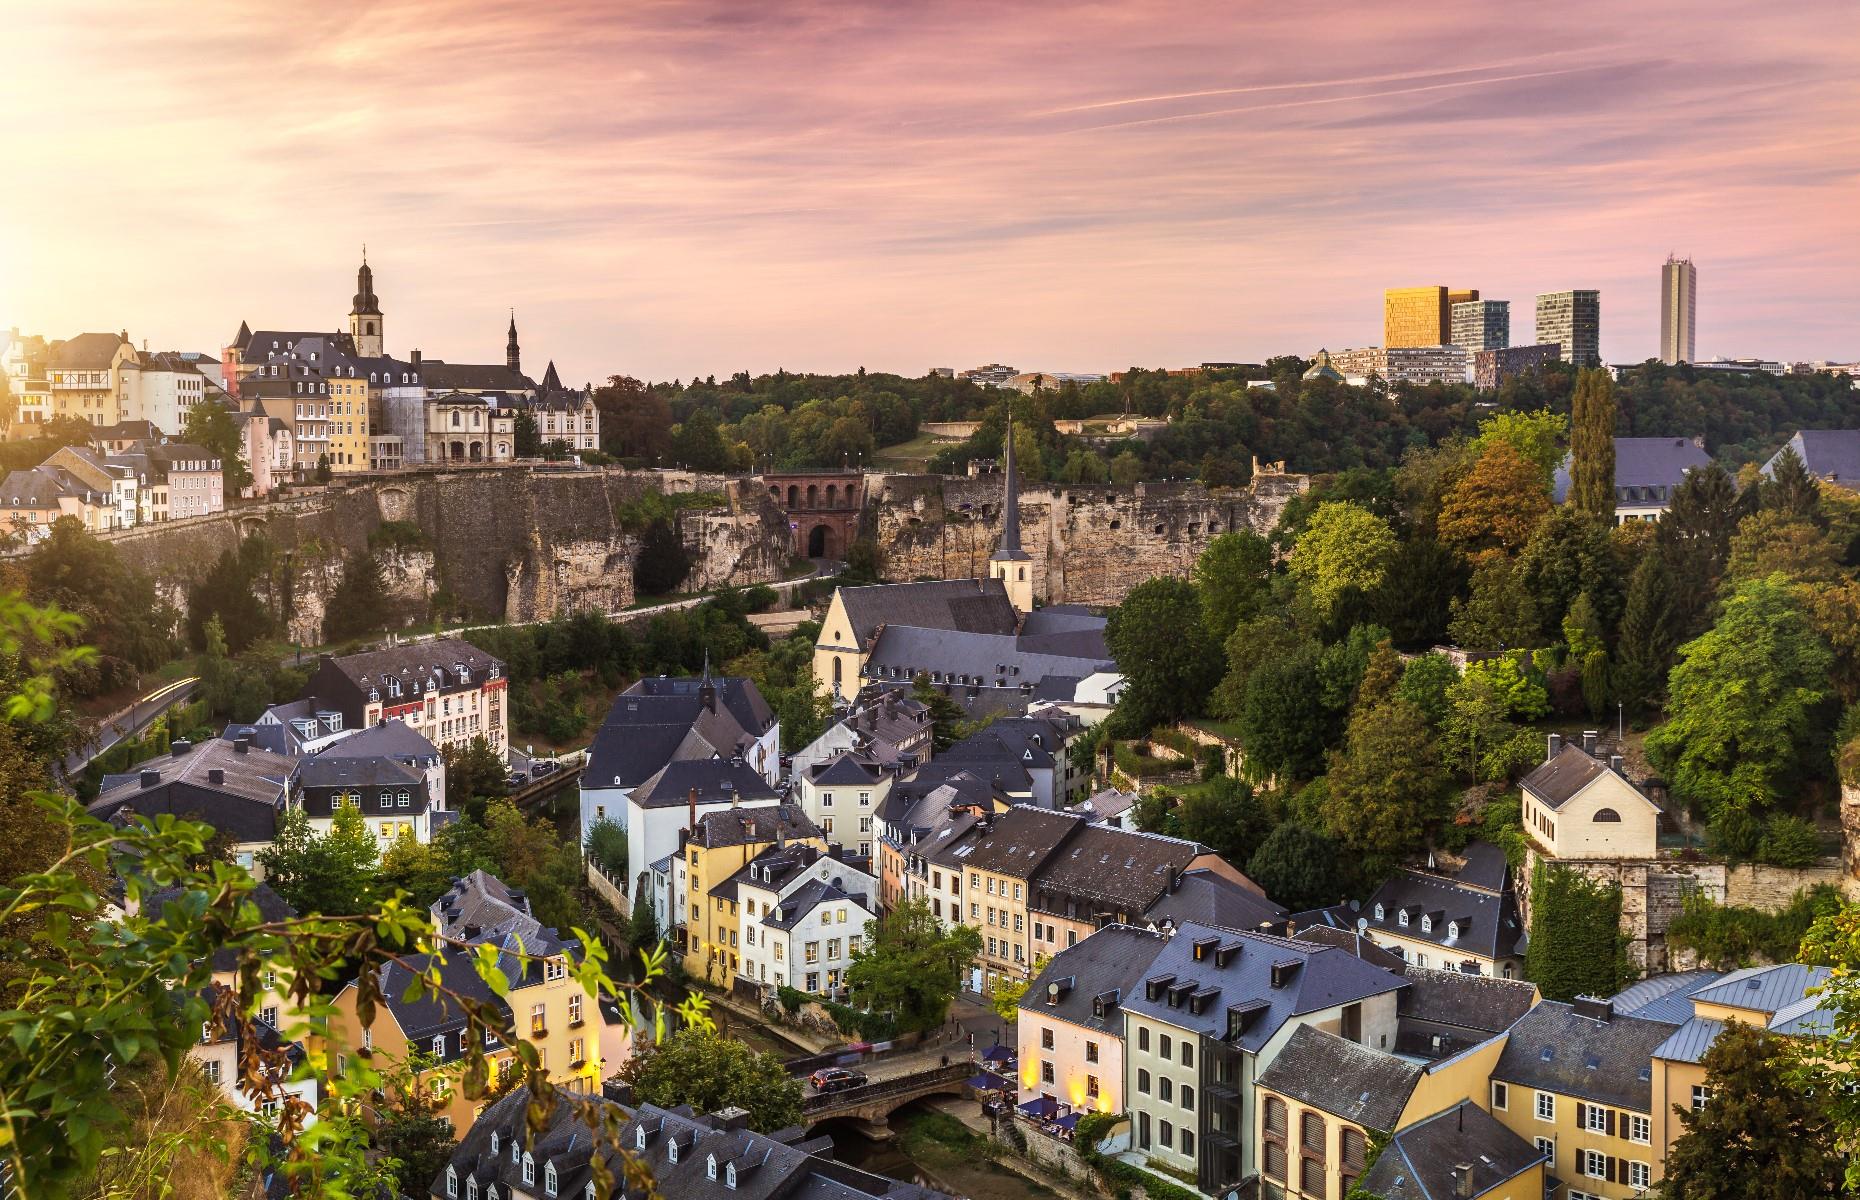 <p><strong>Index score: 72.15</strong></p>  <p>Luxembourg has a small population compared to most countries on this list, with just over 632,000 inhabitants. The country has an impressive minimum wage of €15.53 ($15.77/£12.98) per hour for skilled workers over the age of 18, which is one of the highest in the world and the highest in the EU by far. And it's not just Luxembourgers who are benefiting from it, as the majority of the country's workforce is made up of cross-border workers from France and other neighbouring countries. Despite the generous wages, many Luxembourg residents still choose to do their grocery shopping in France, where everything is considerably cheaper.</p>